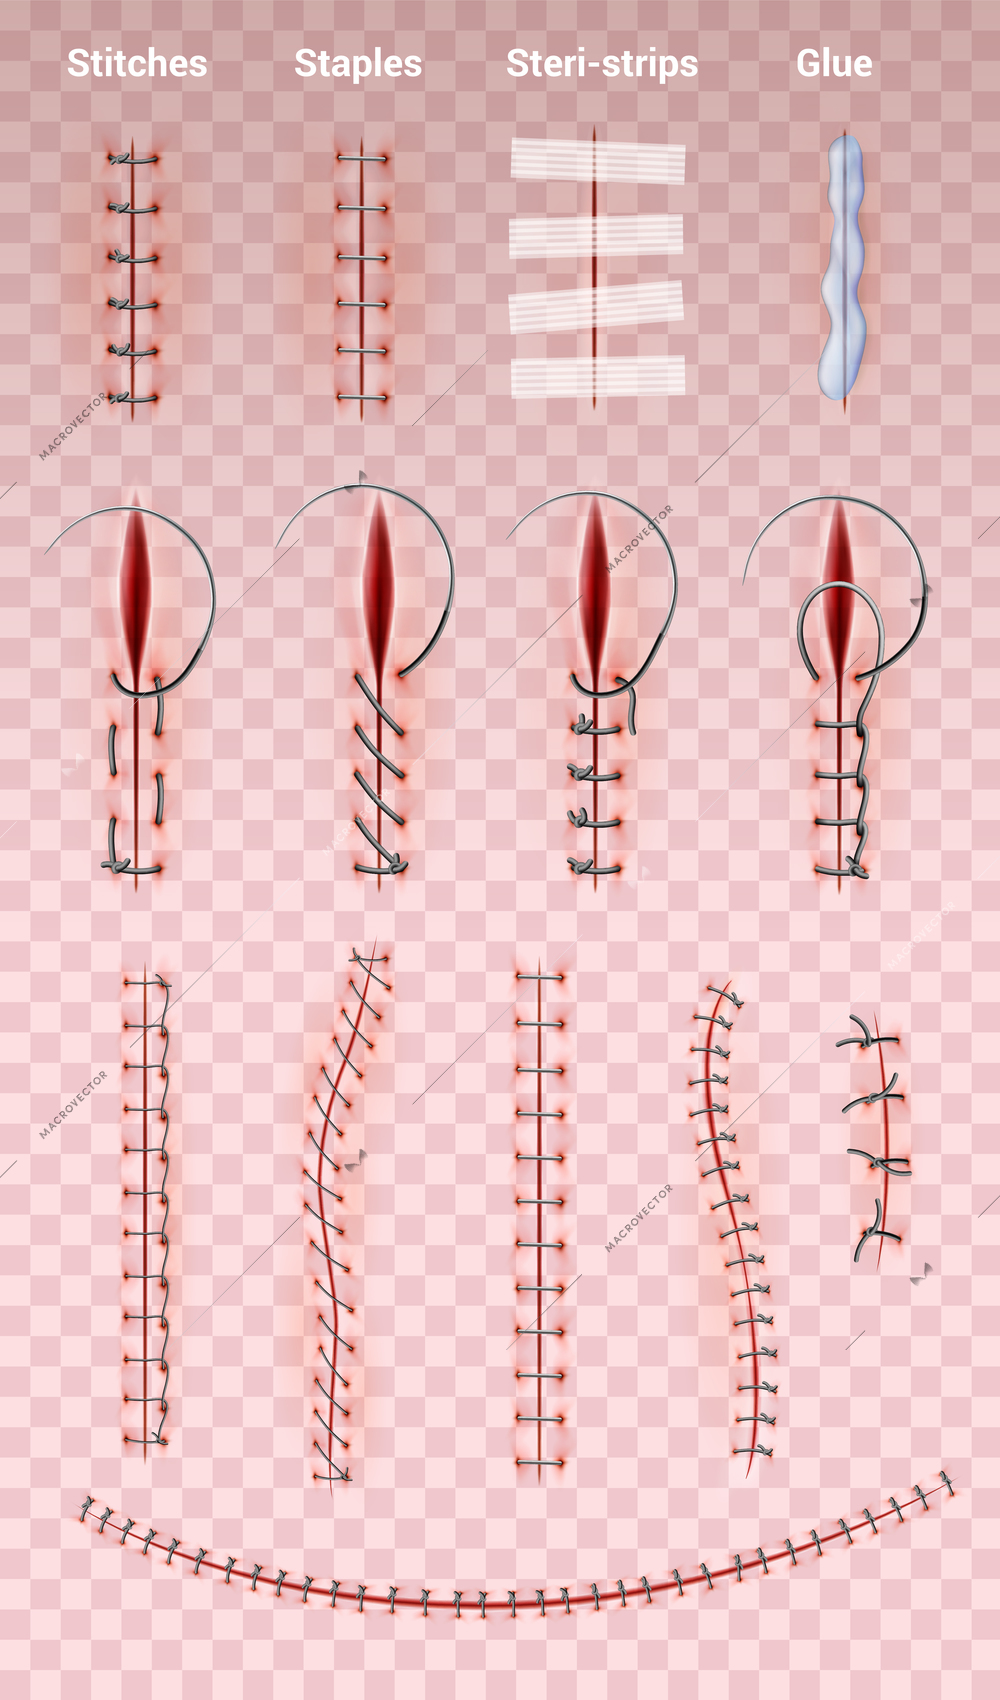 Surgical suture stitches realistic set of images on transparent background with different shapes of medical stitching vector illustration